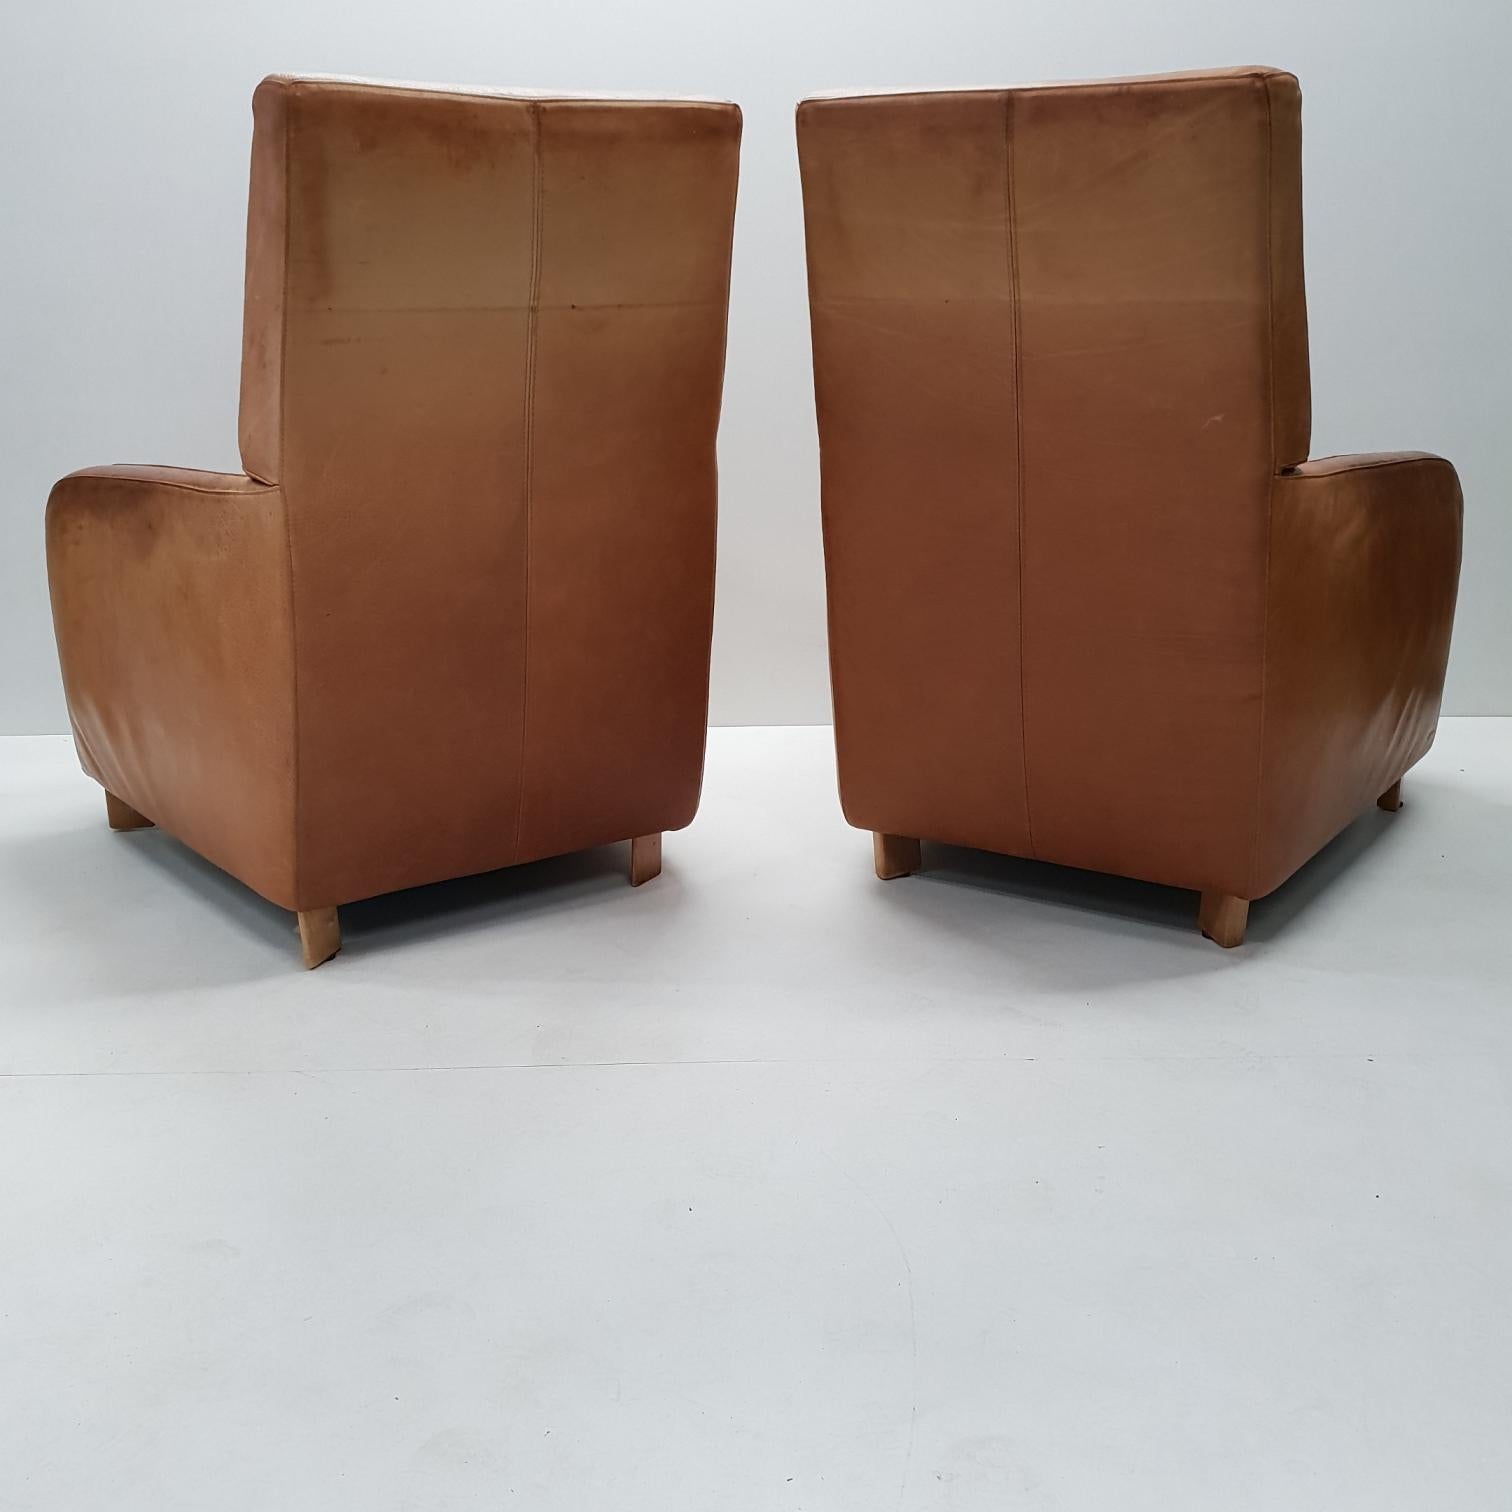 Italian Pair of High Quality Cognac Leather Lounge Chairs by Molinari 'Marked', 1990s